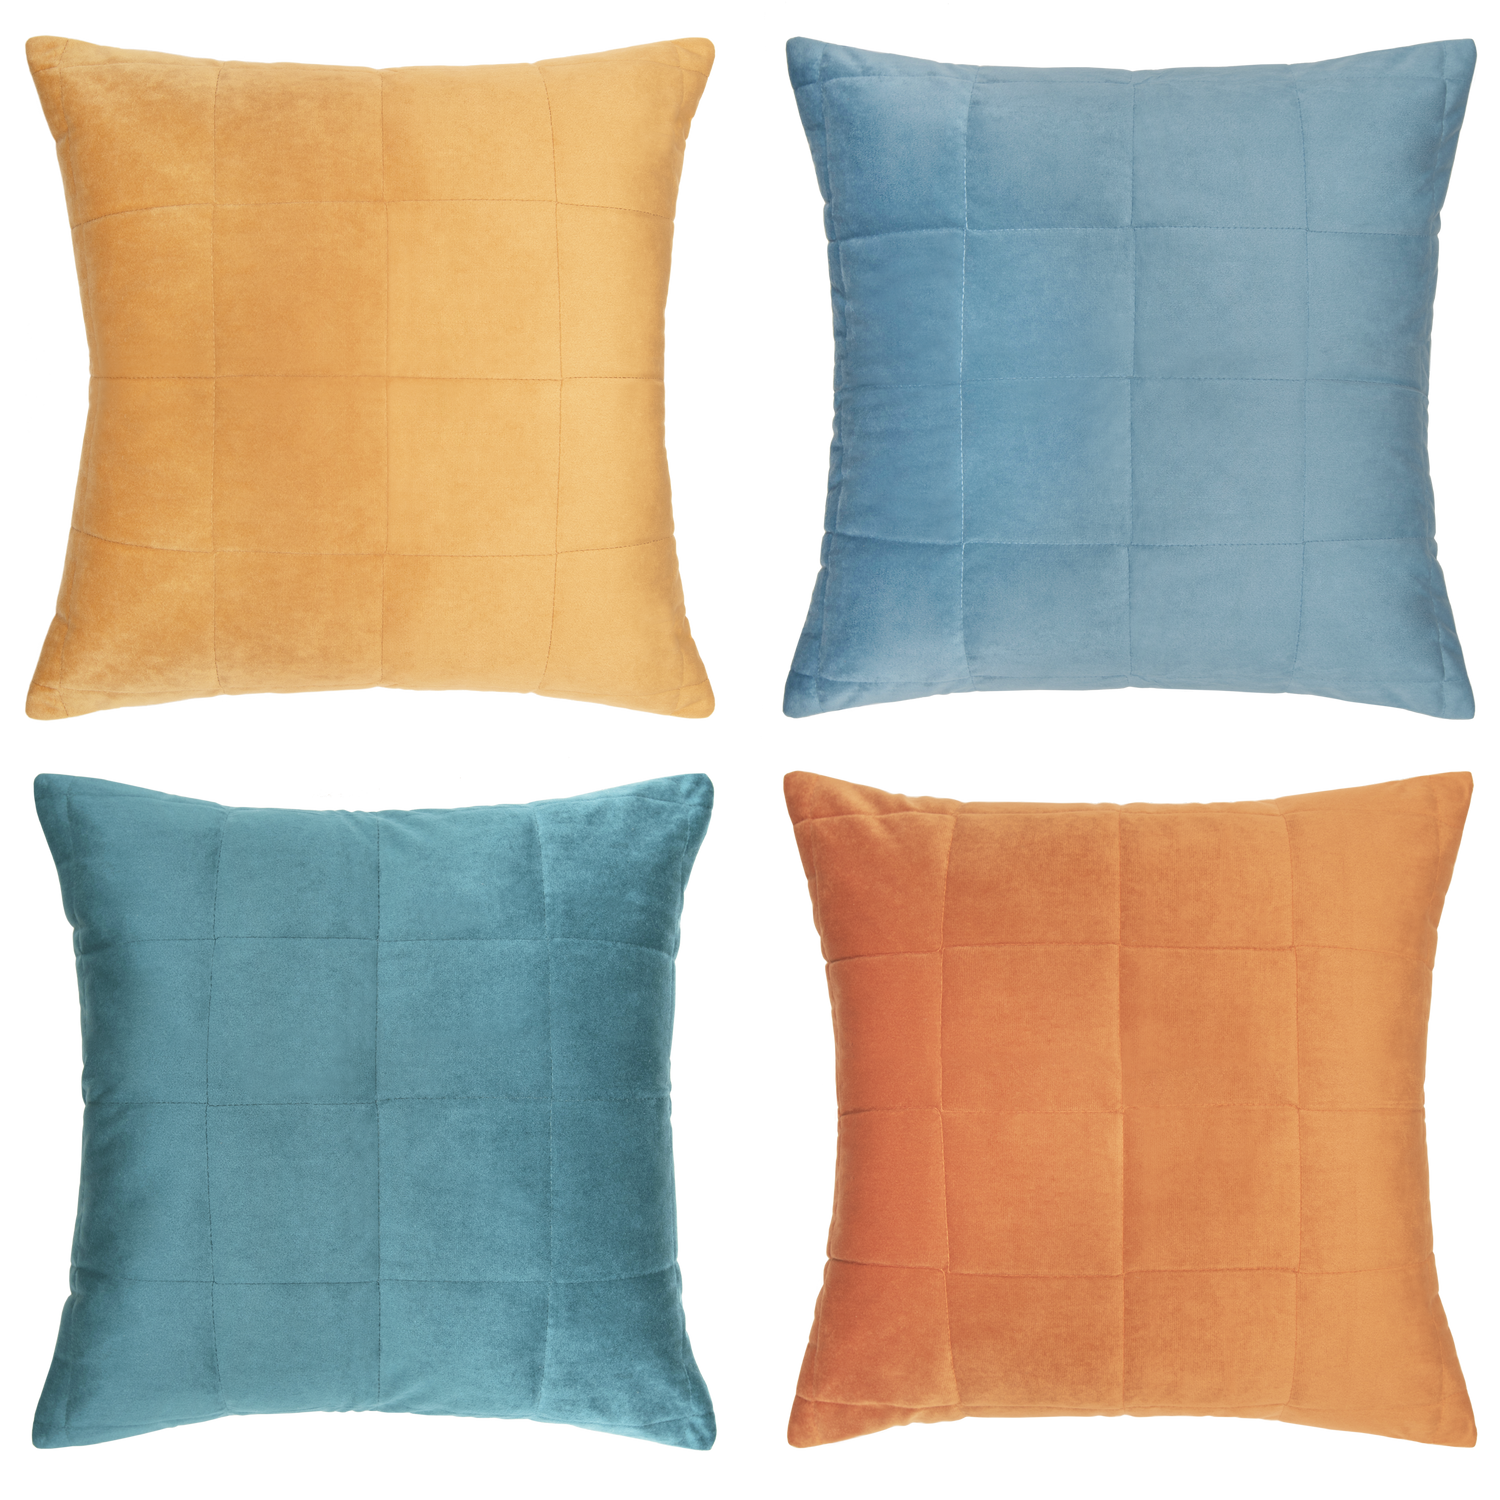 throw pillow covers velvet grid quilted yellow green orange blue soft 18 inch